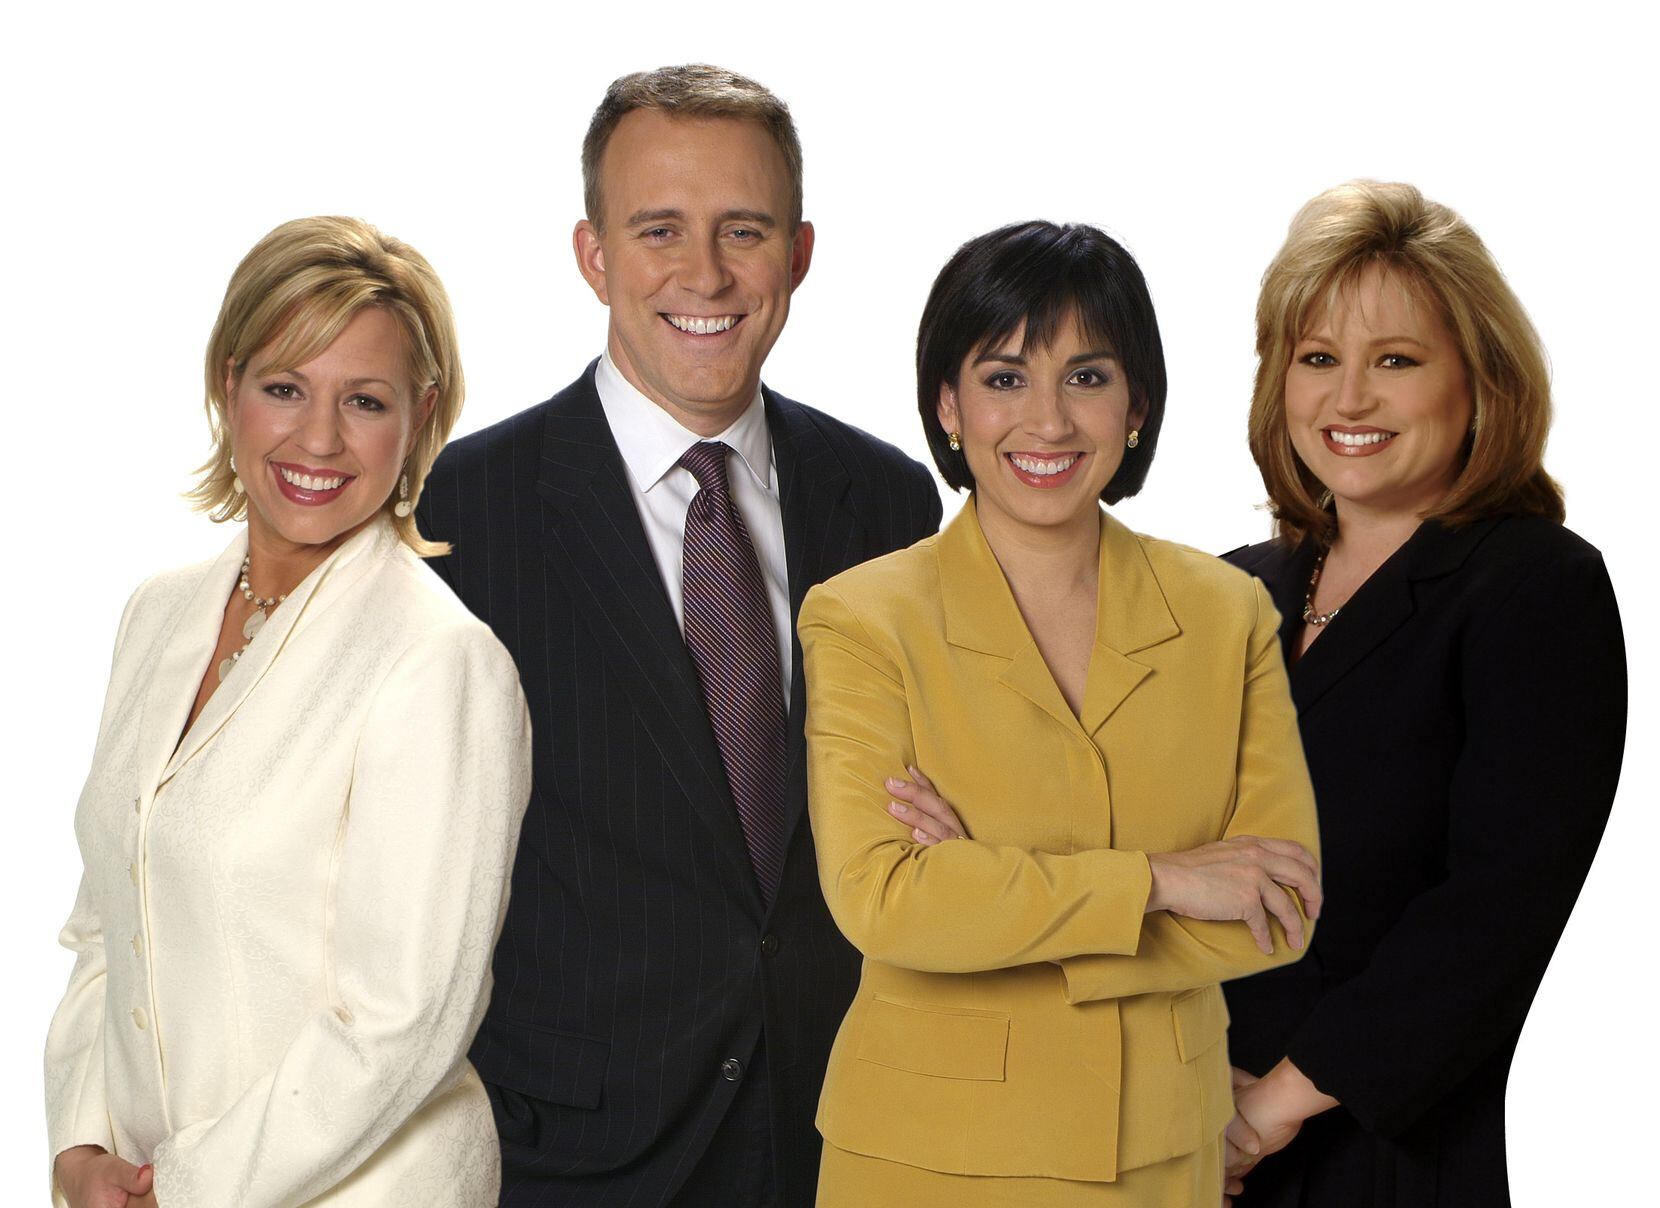 Brendan Higgins was a popular local reporter and anchor, first at KXAS-TV (NBC5) and later at KTVT-TV (Channel 11). Here he's shown with colleagues who made up NBC5's morning news team in 2005.